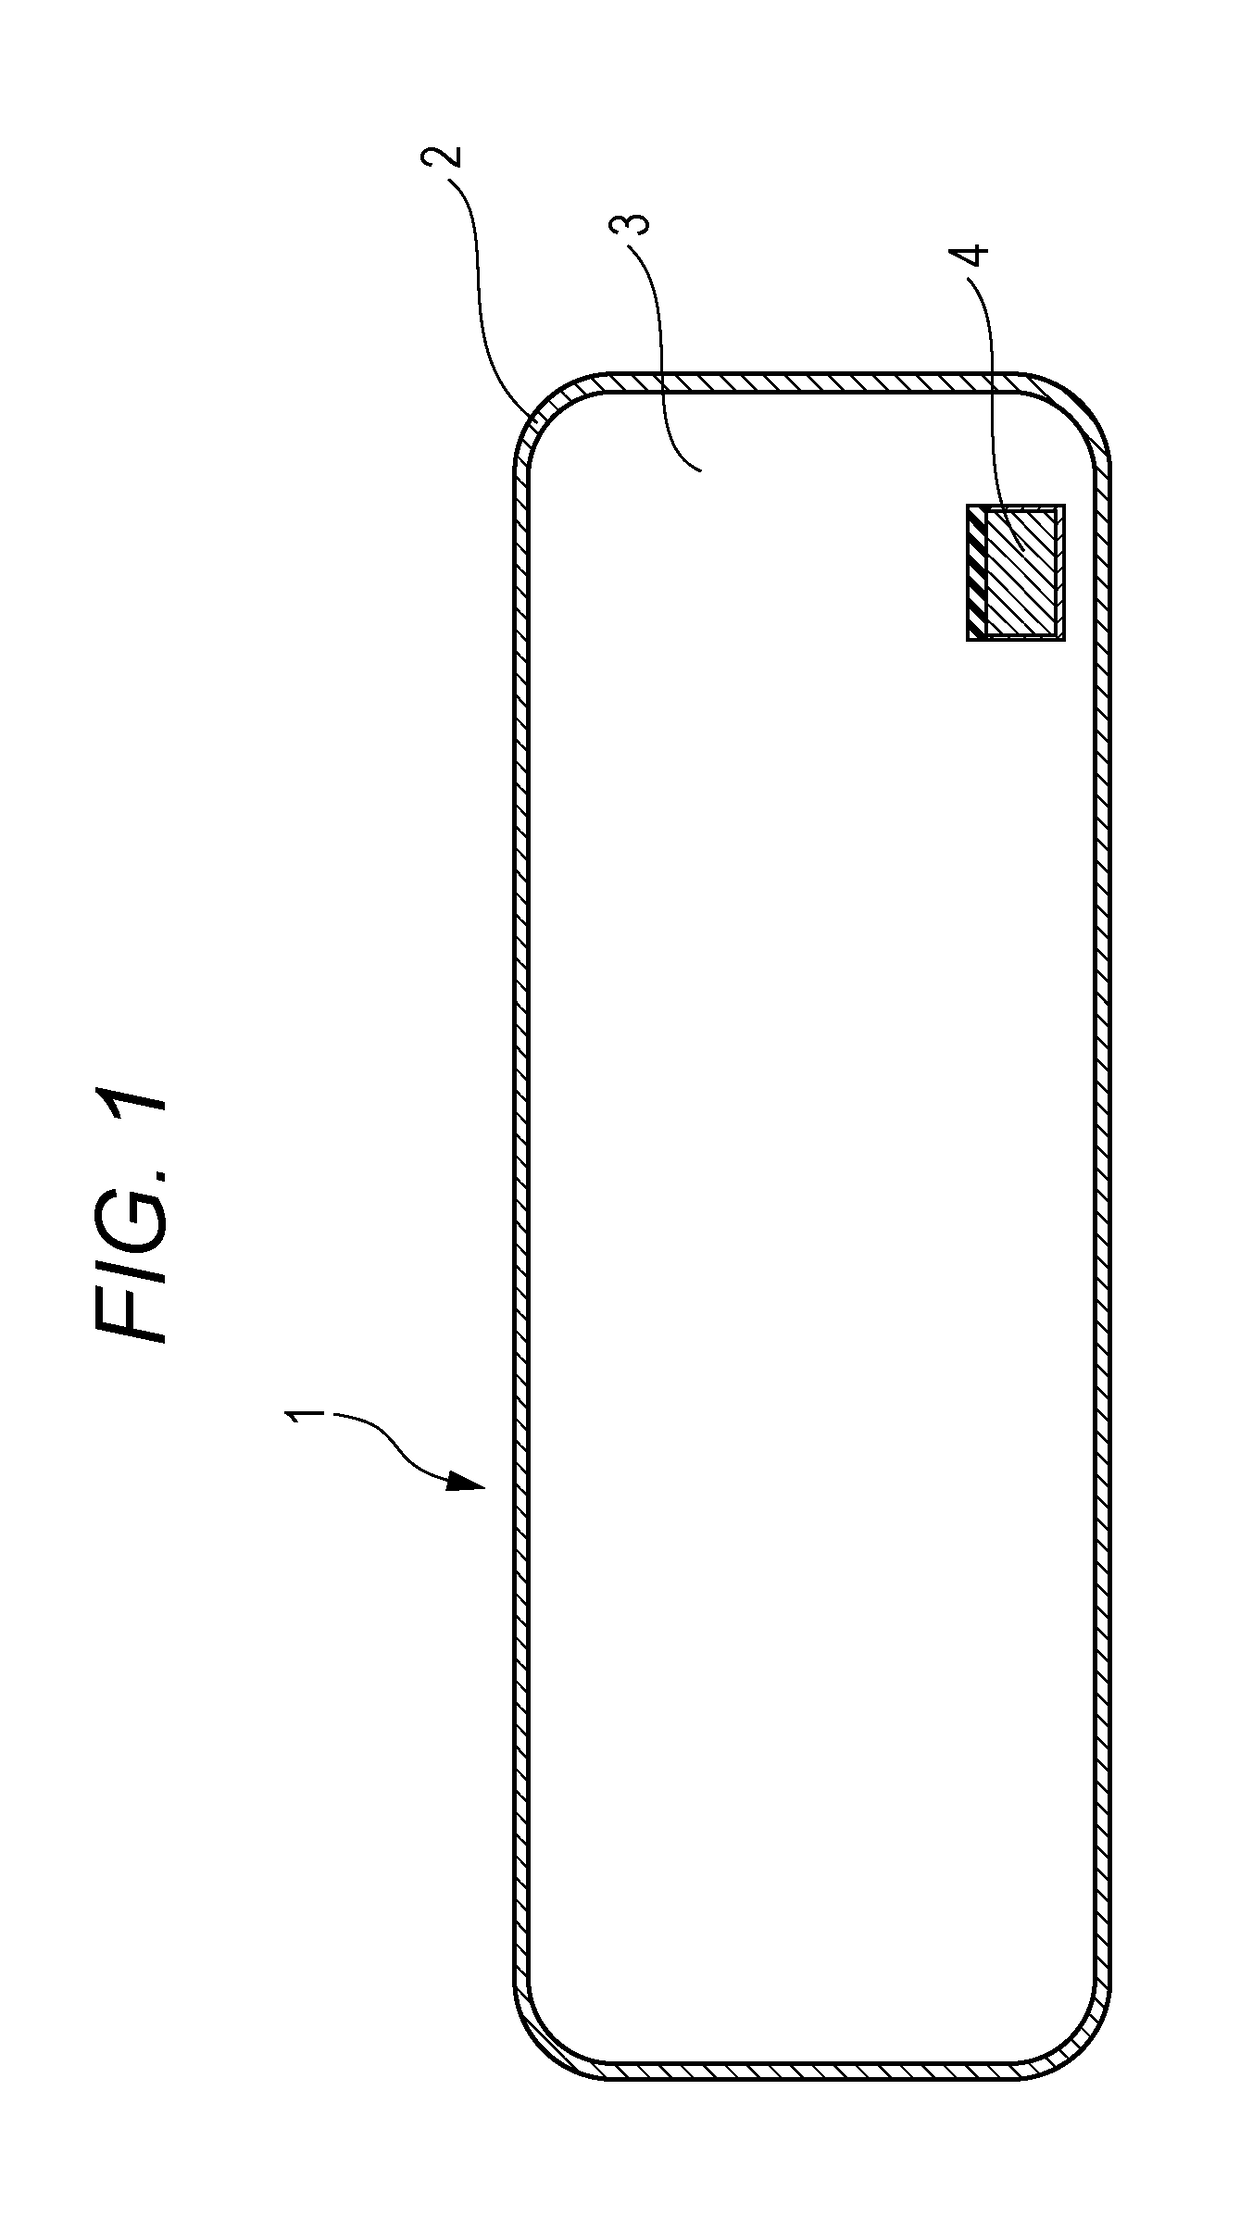 Sealed container, thermal insulator, and gas adsorption device